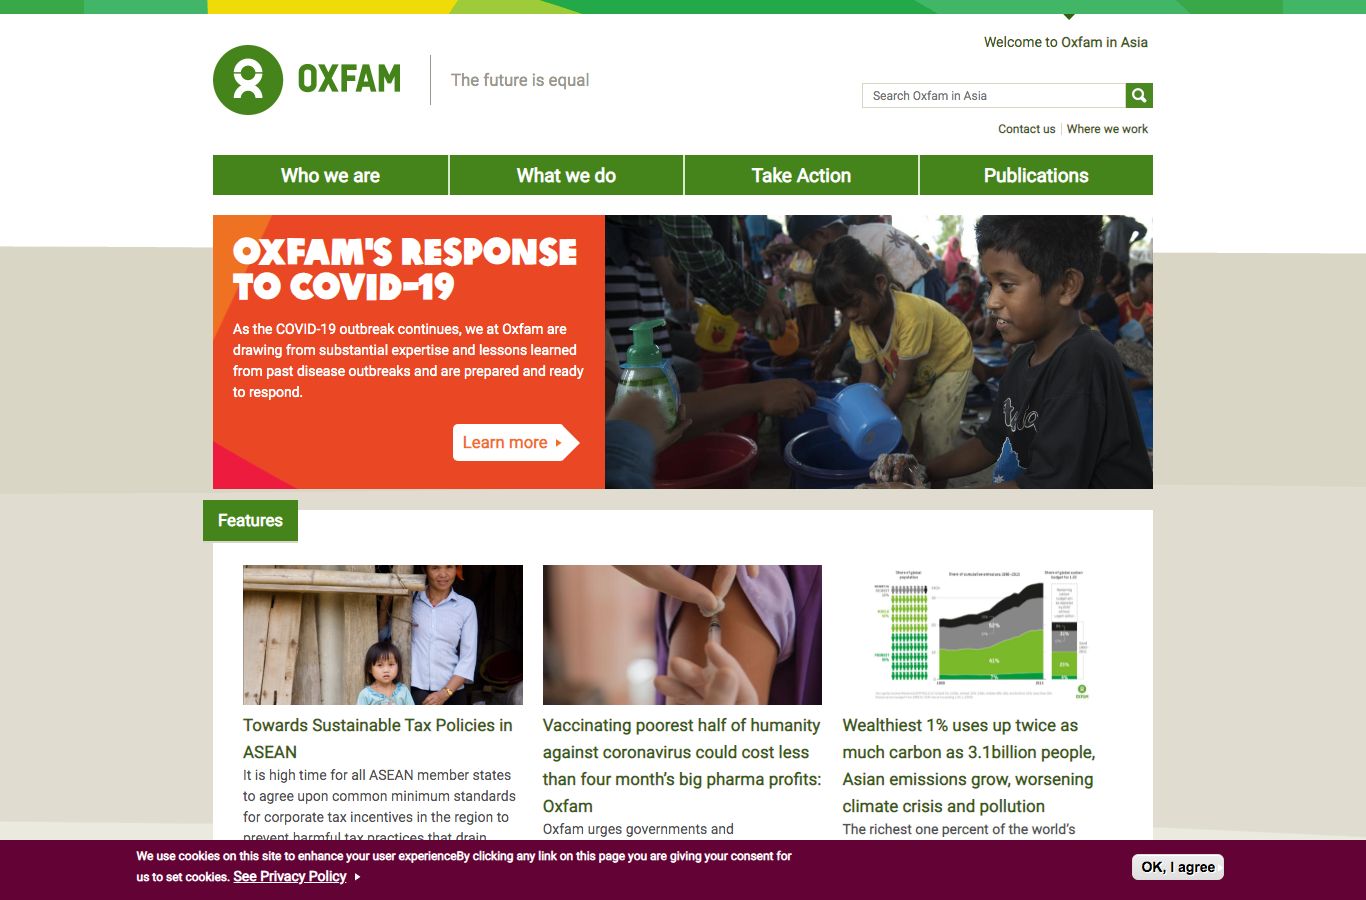 Oxfam in Asia | The future is equal